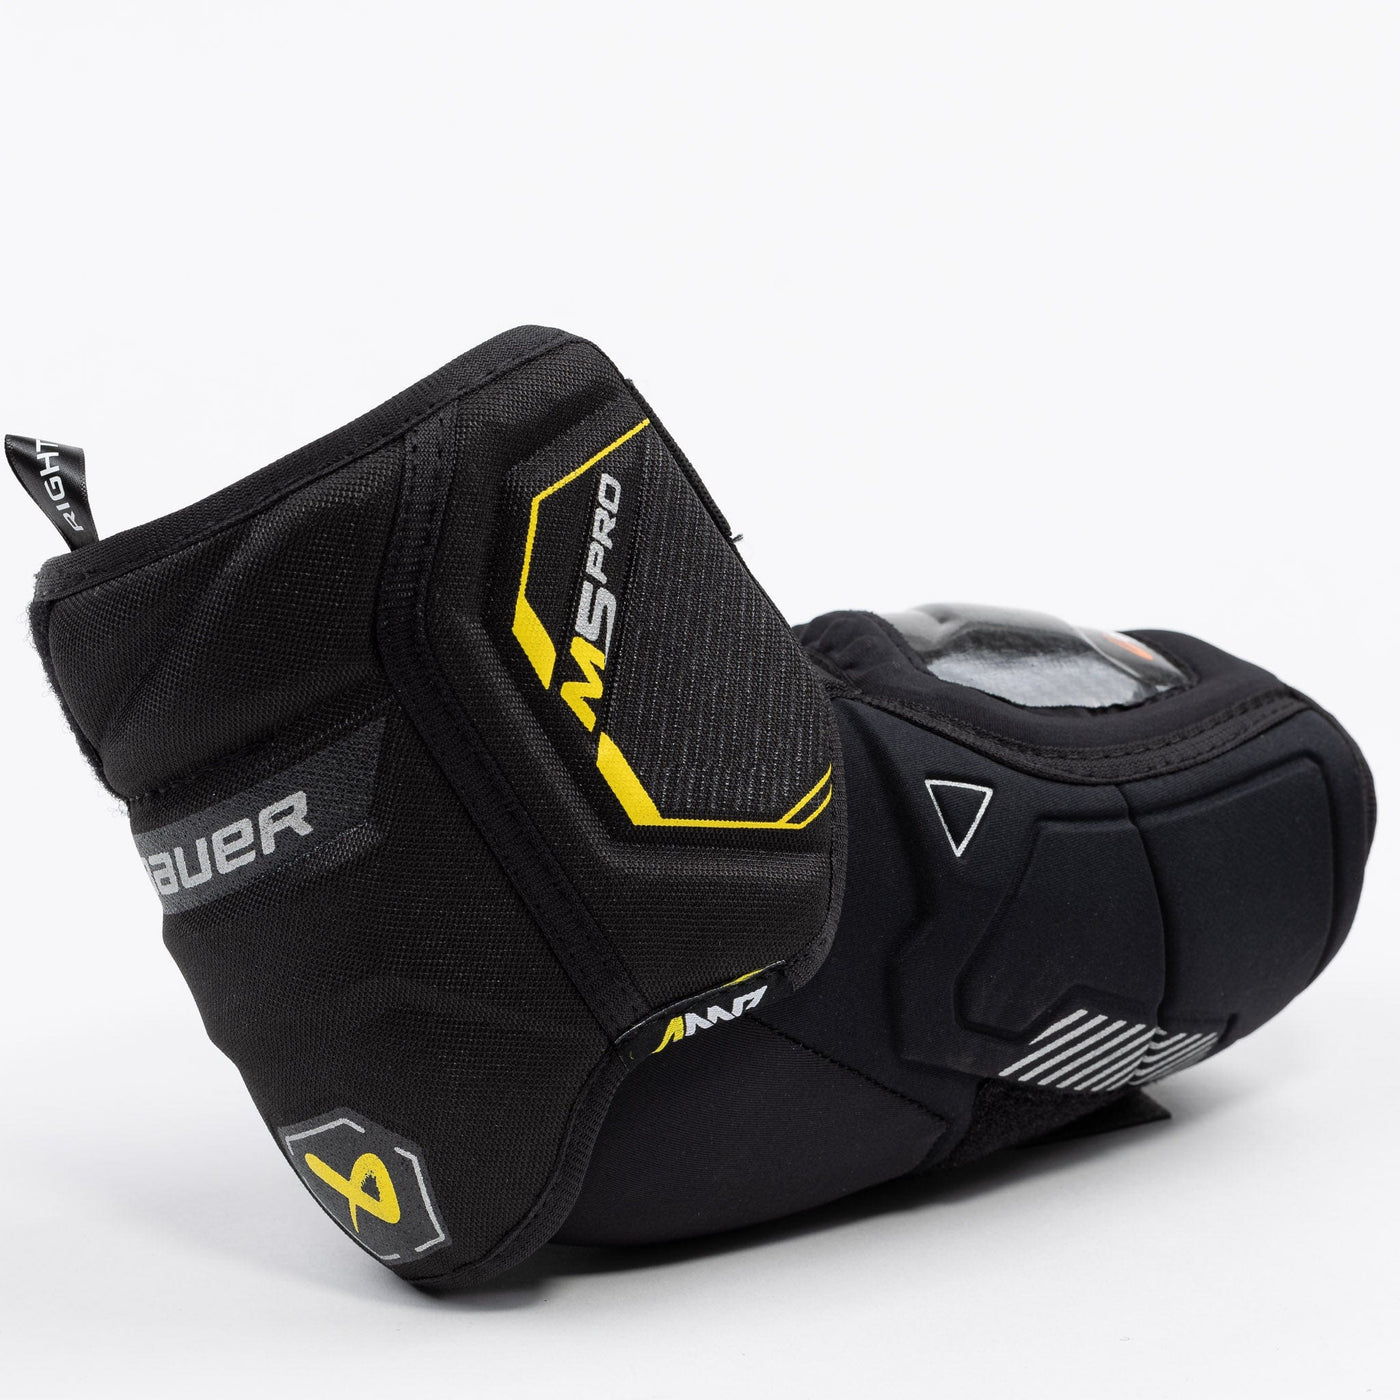 Bauer Supreme M5 Pro Senior Hockey Elbow Pads - The Hockey Shop Source For Sports